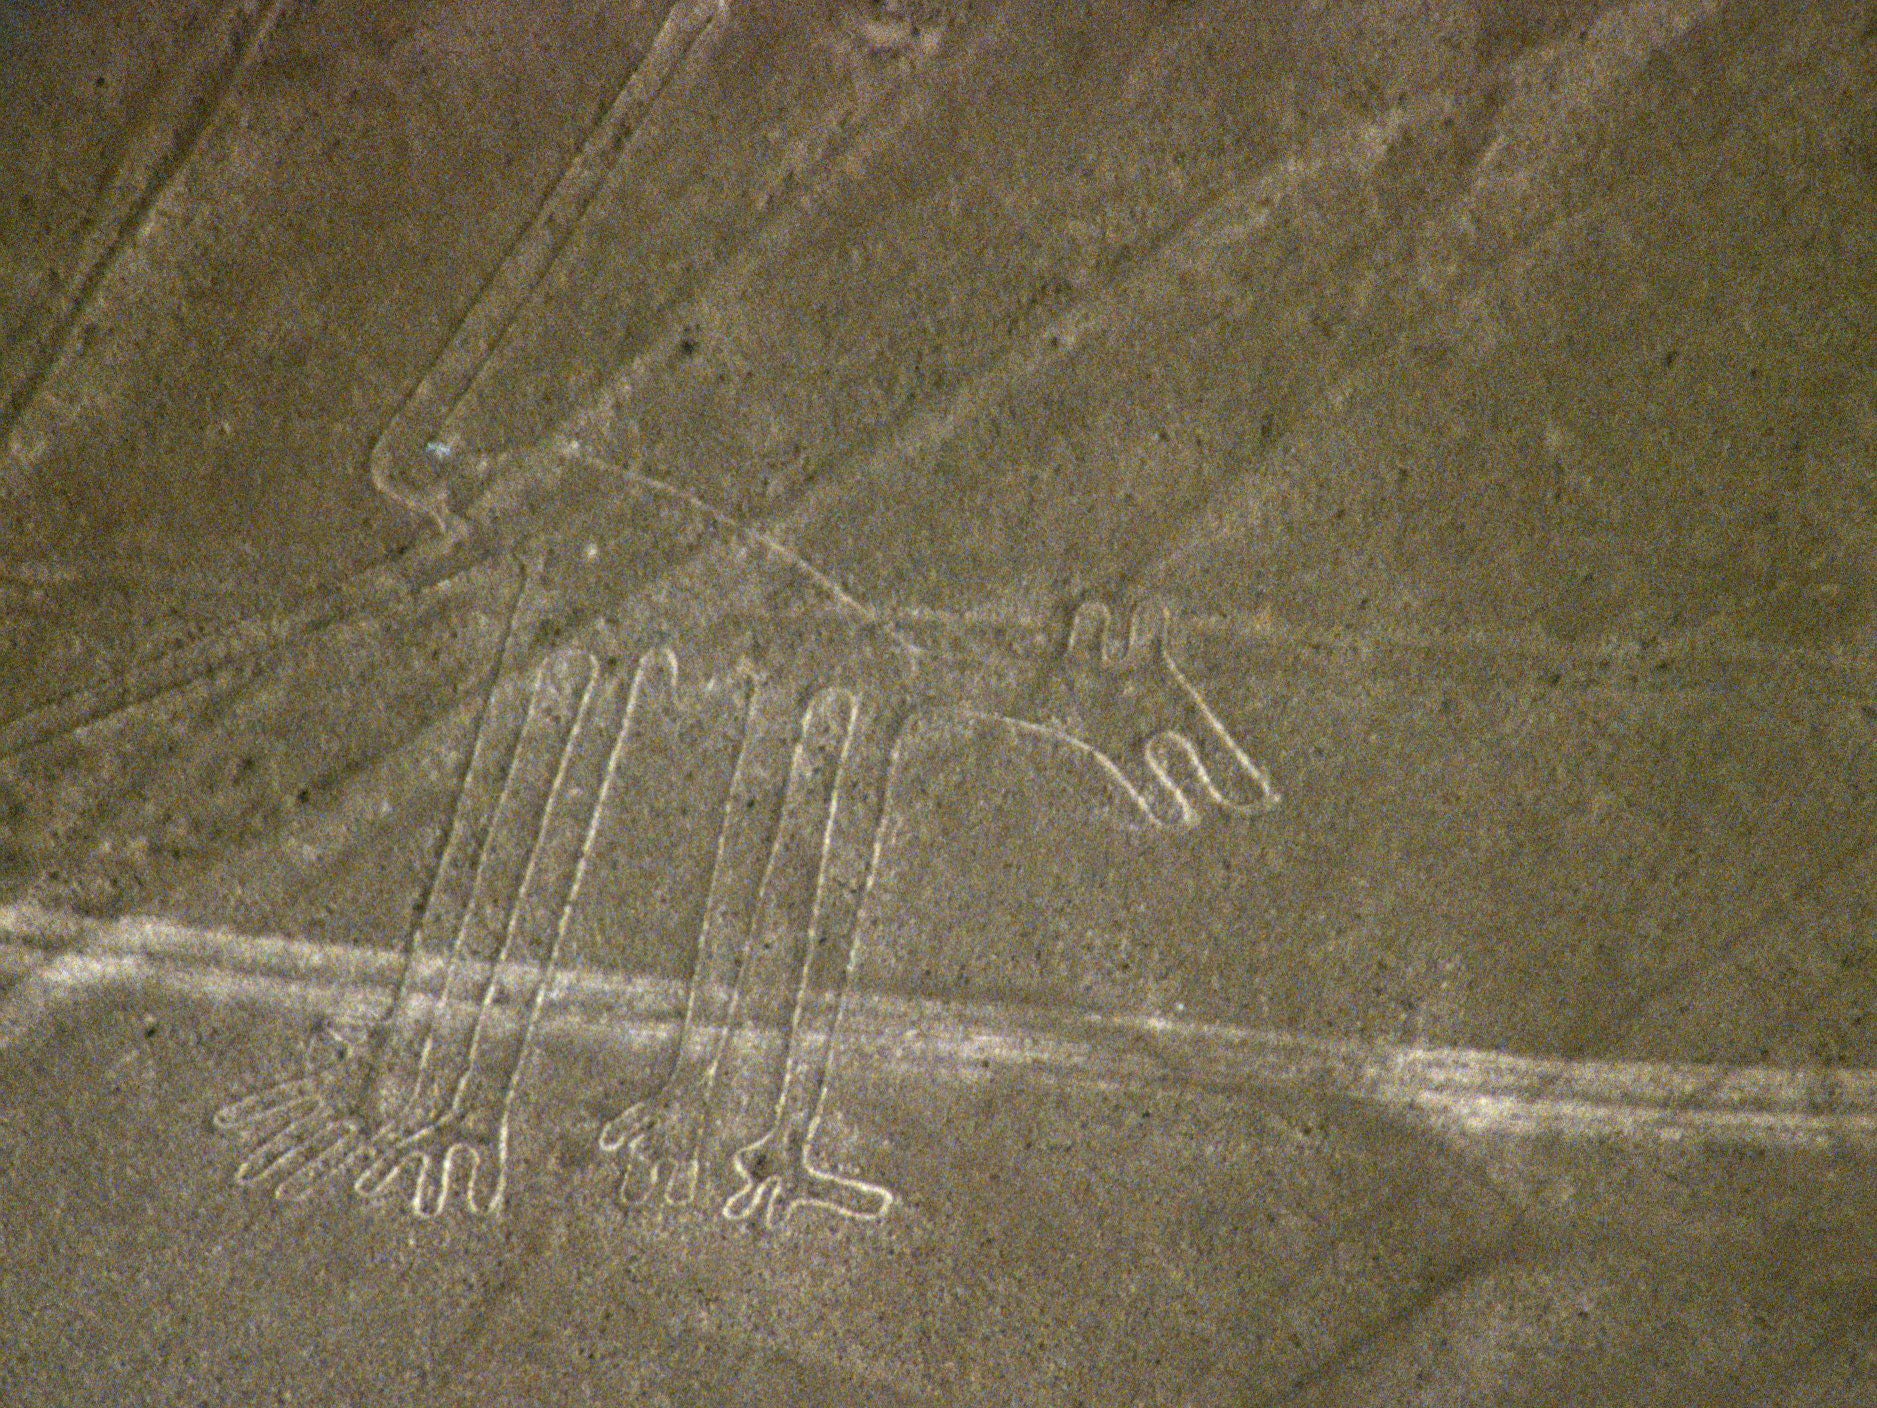 "The dog" geoglyph in the Nazca Lines